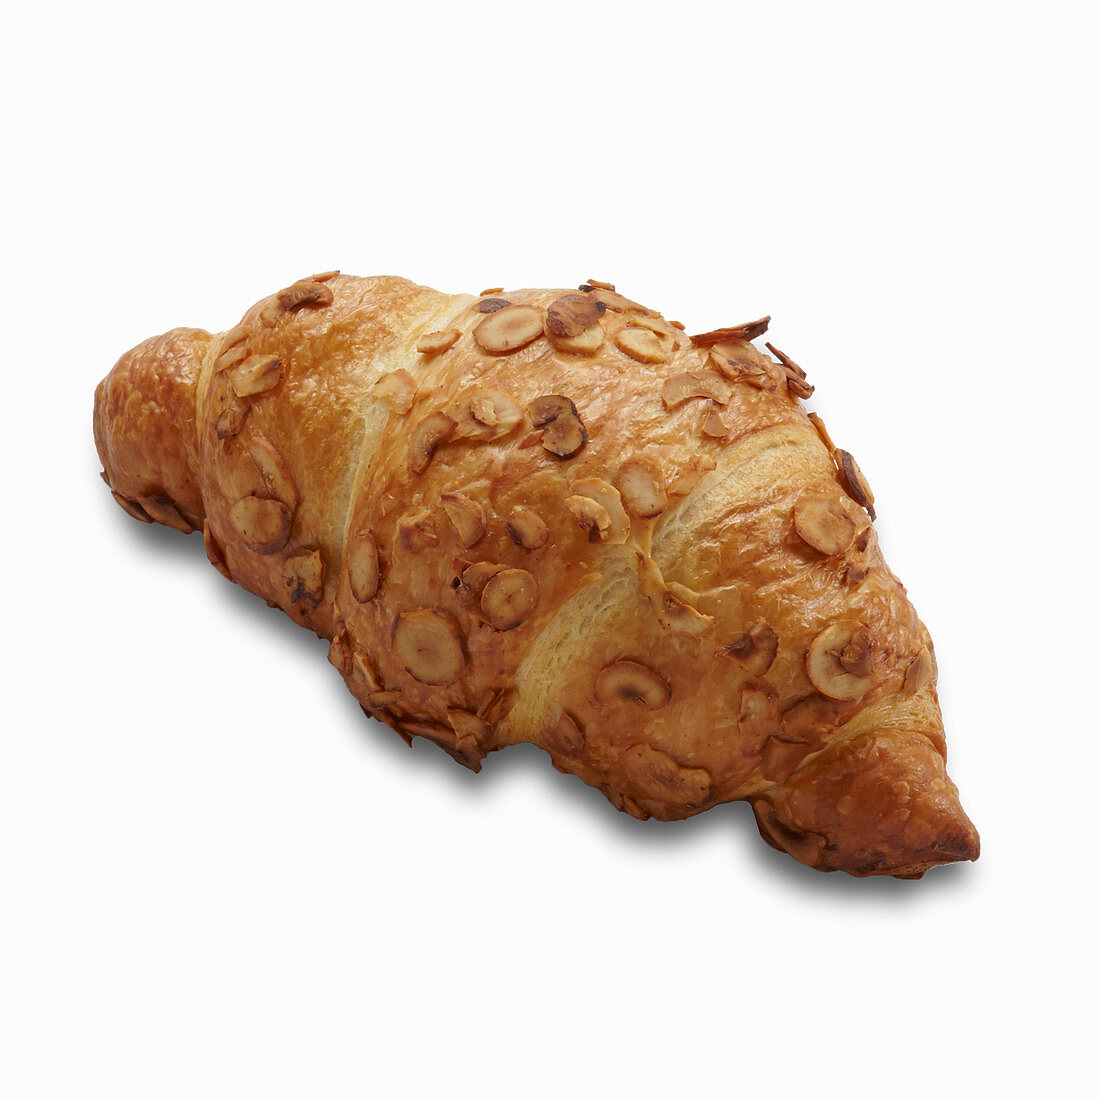 A nut croissant on a white surface